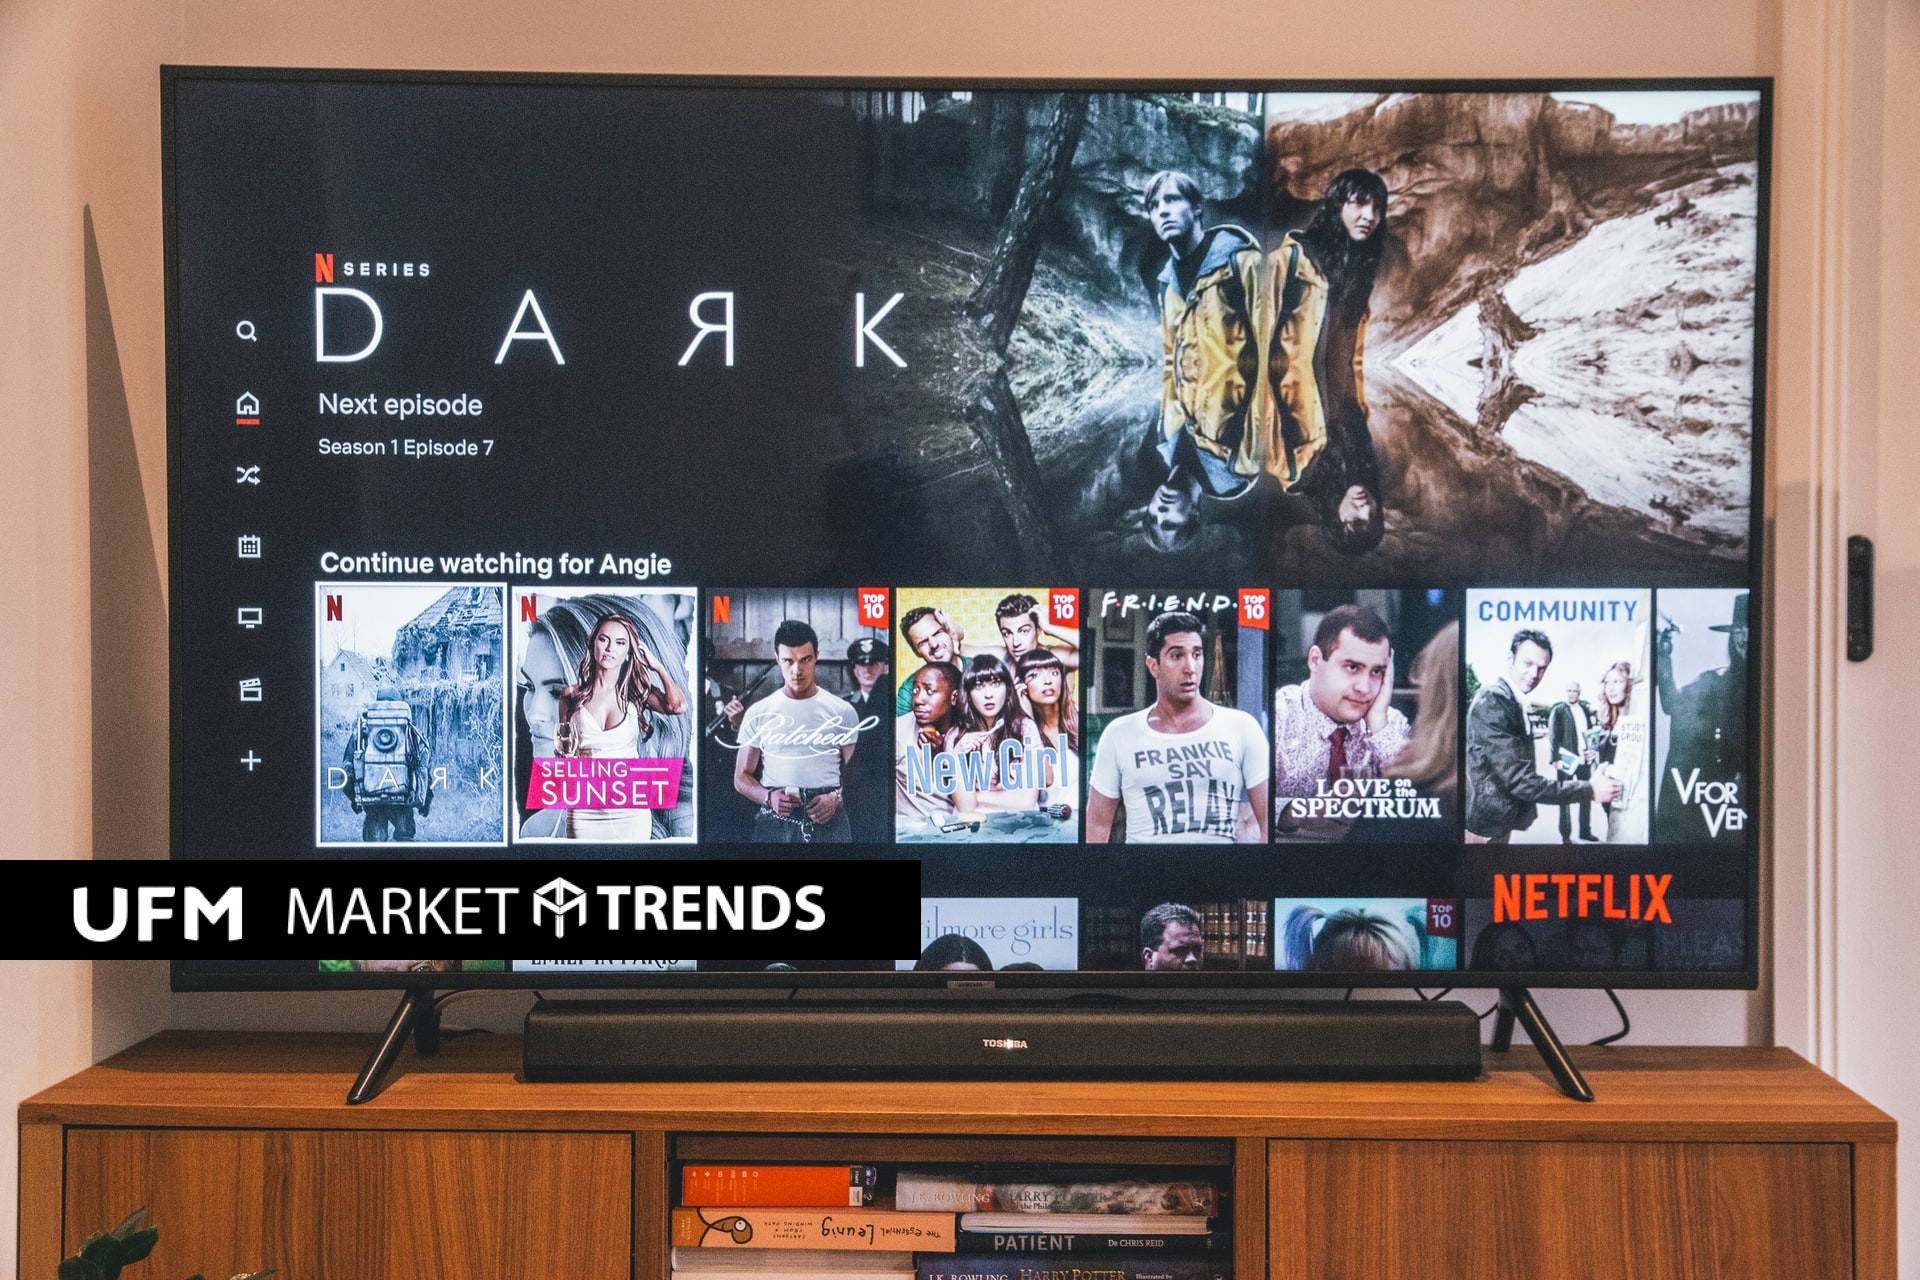 Netflix Acquires Global Streaming Rights to 3 More U.S. TV Shows